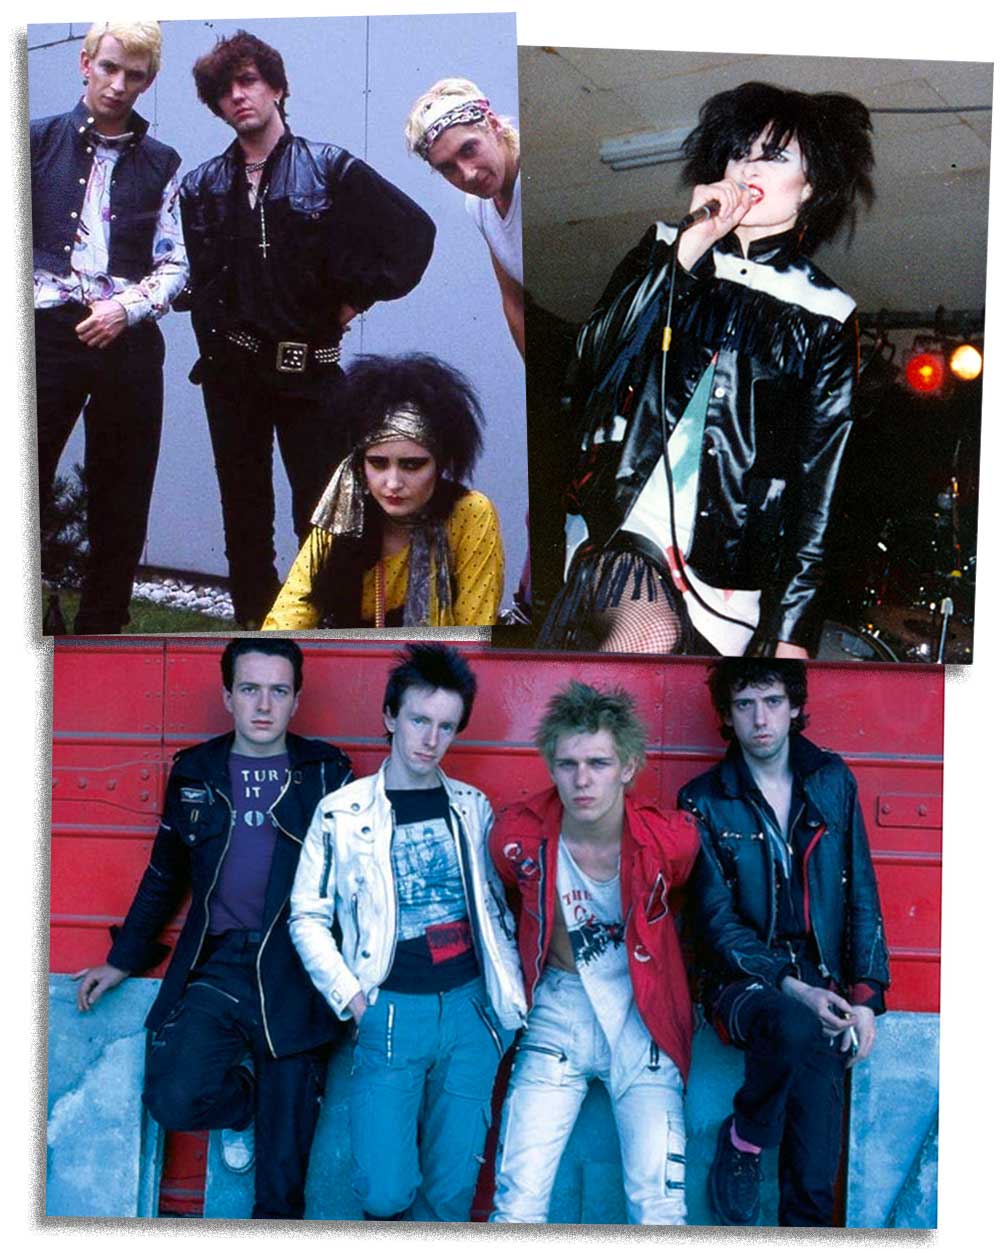 The Clash and Siouxsie and the Banshees 80s punk fashion 